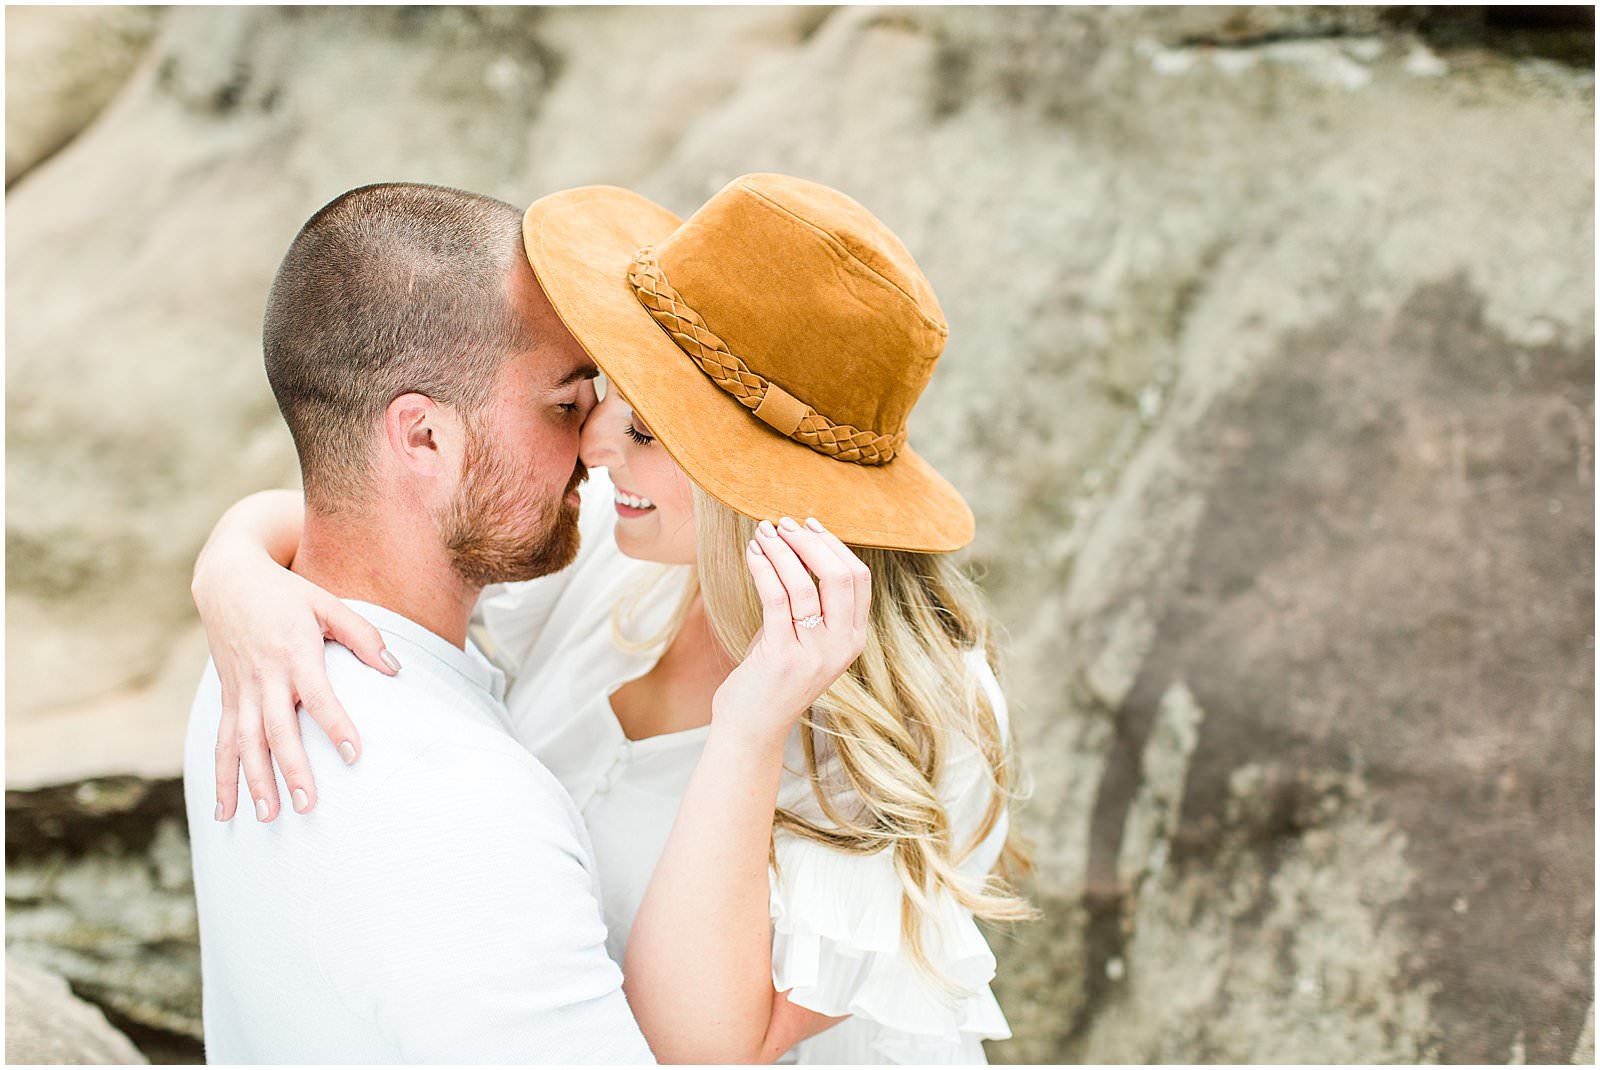 A Garden of the Gods Engagement Session 0012.jpg